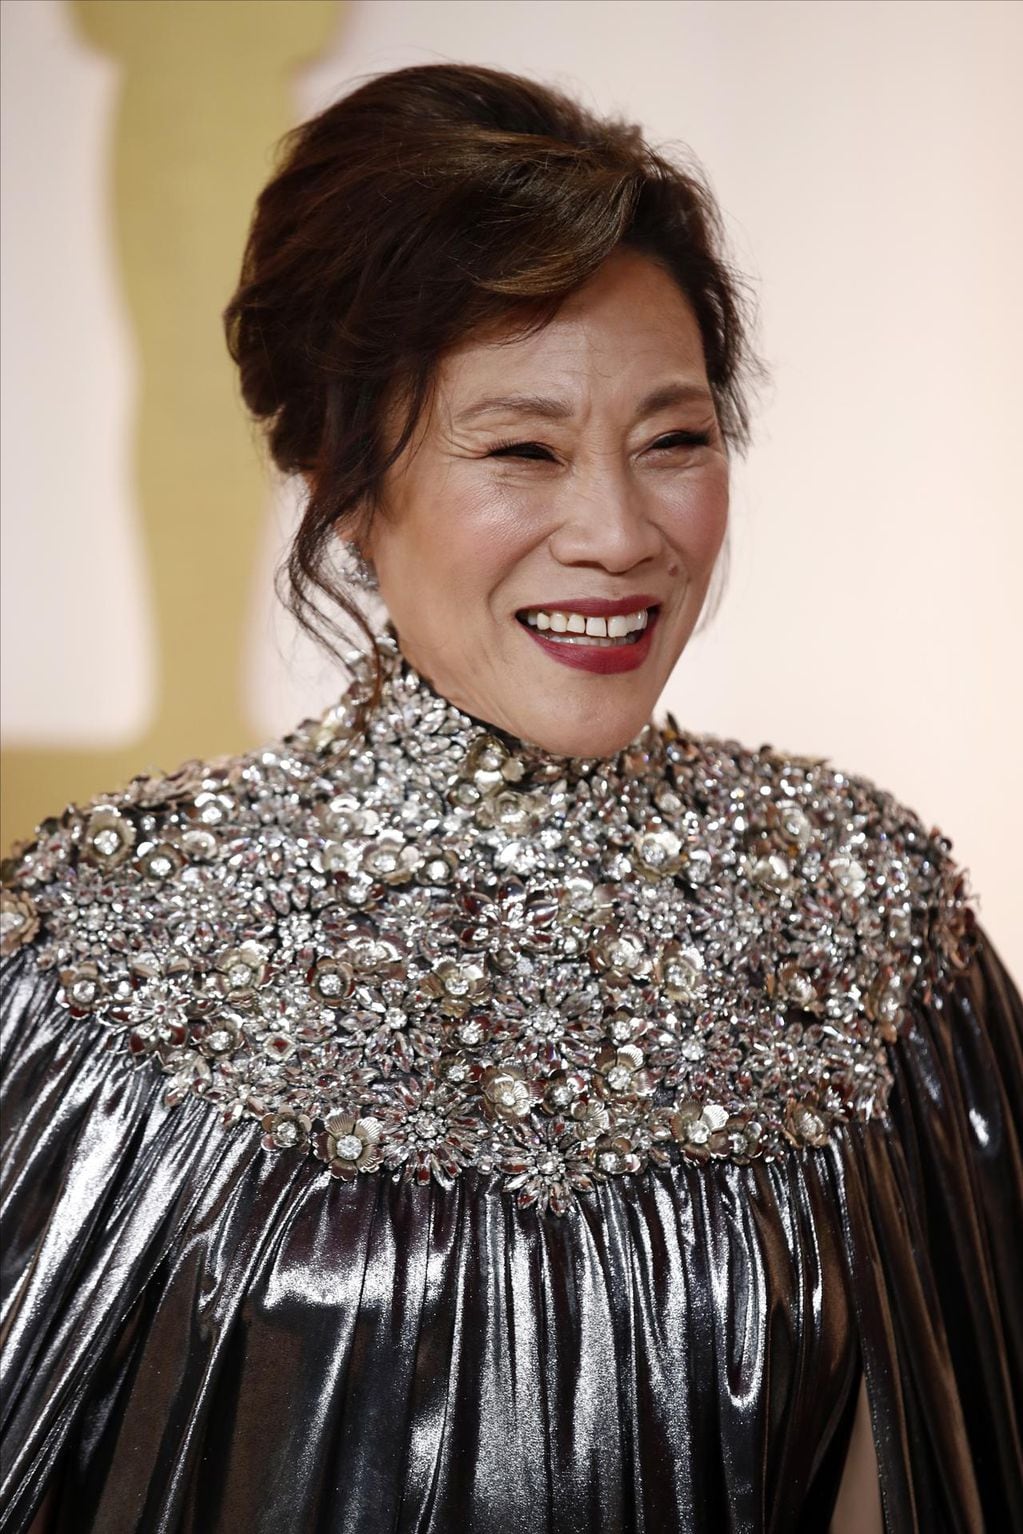 Hollywood (United States), 12/03/2023.- Janet Yang, the president of the Academy of Motion Picture Arts and Sciences, arrives for the 95th annual Academy Awards ceremony at the Dolby Theatre in Hollywood, Los Angeles, California, USA, 12 March 2023. The Oscars are presented for outstanding individual or collective efforts in filmmaking in 24 categories. (Estados Unidos) EFE/EPA/CAROLINE BREHMAN
